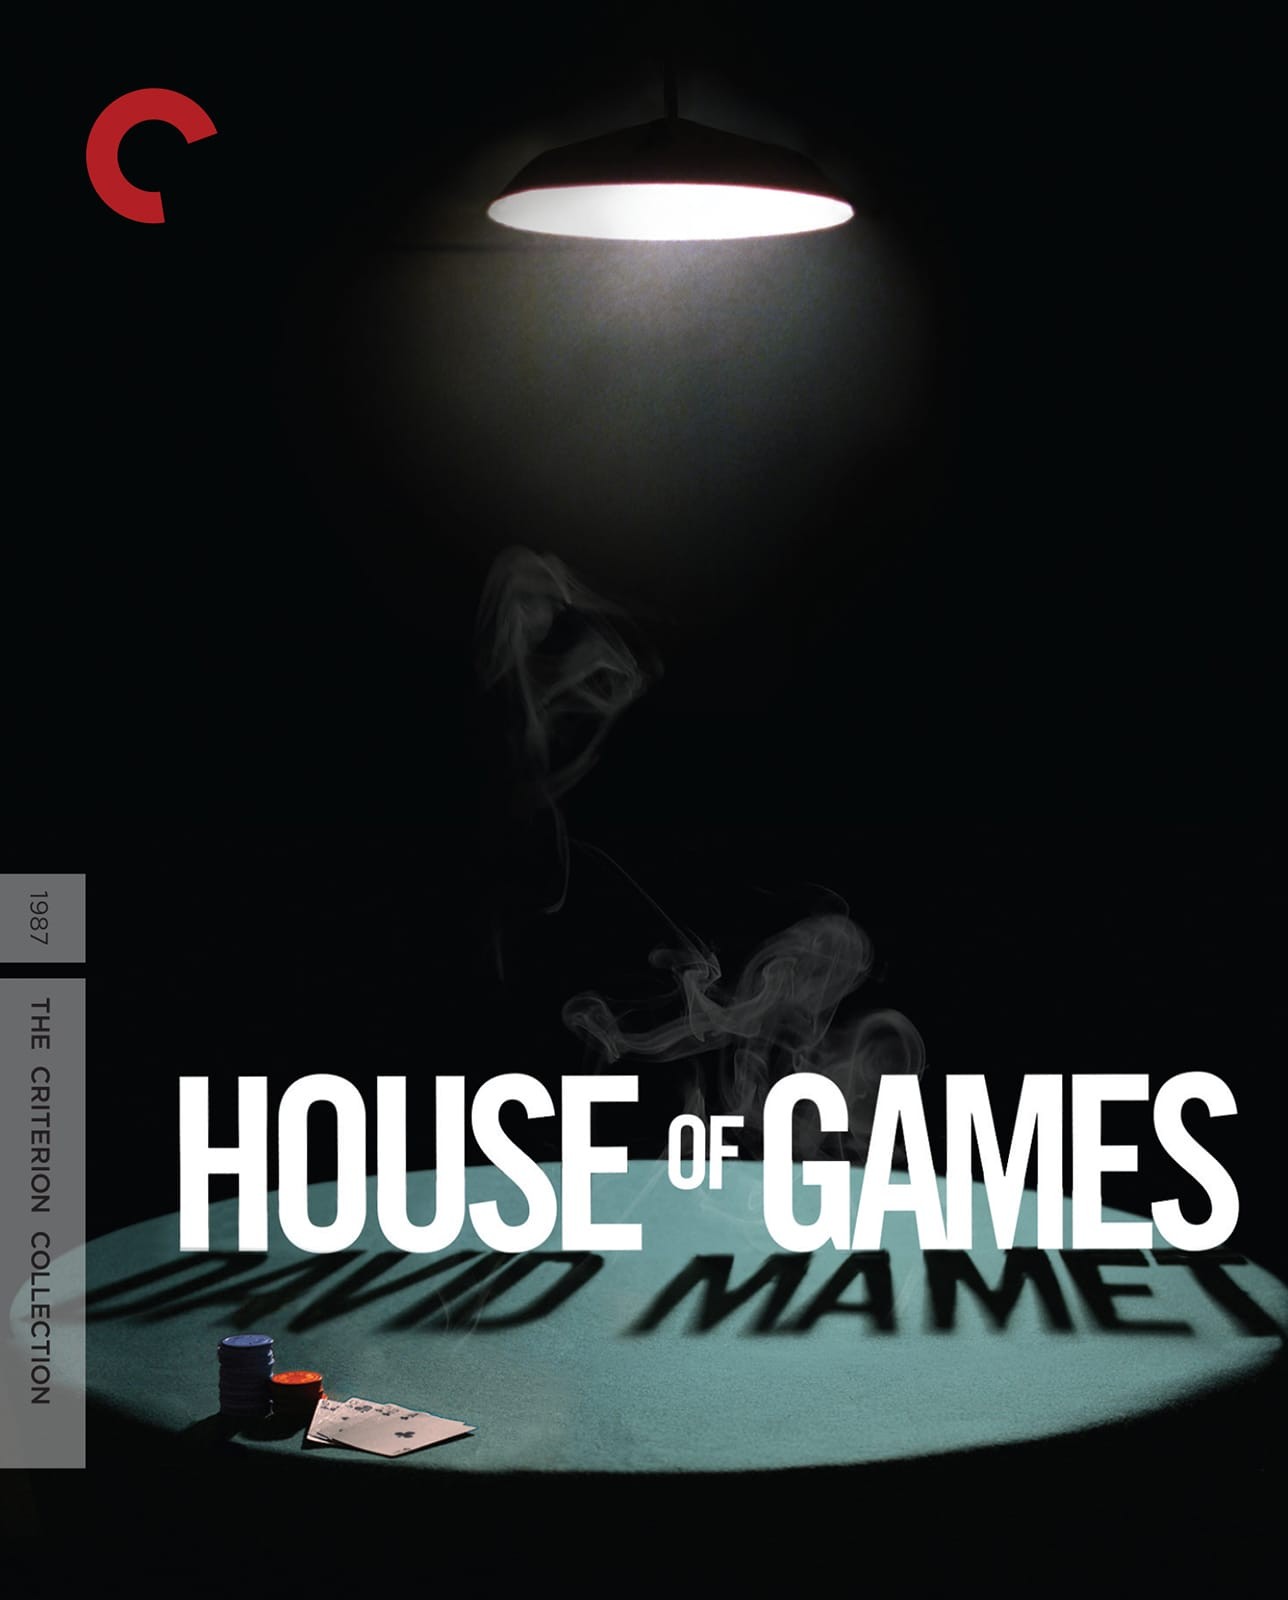 The film "House of Games"